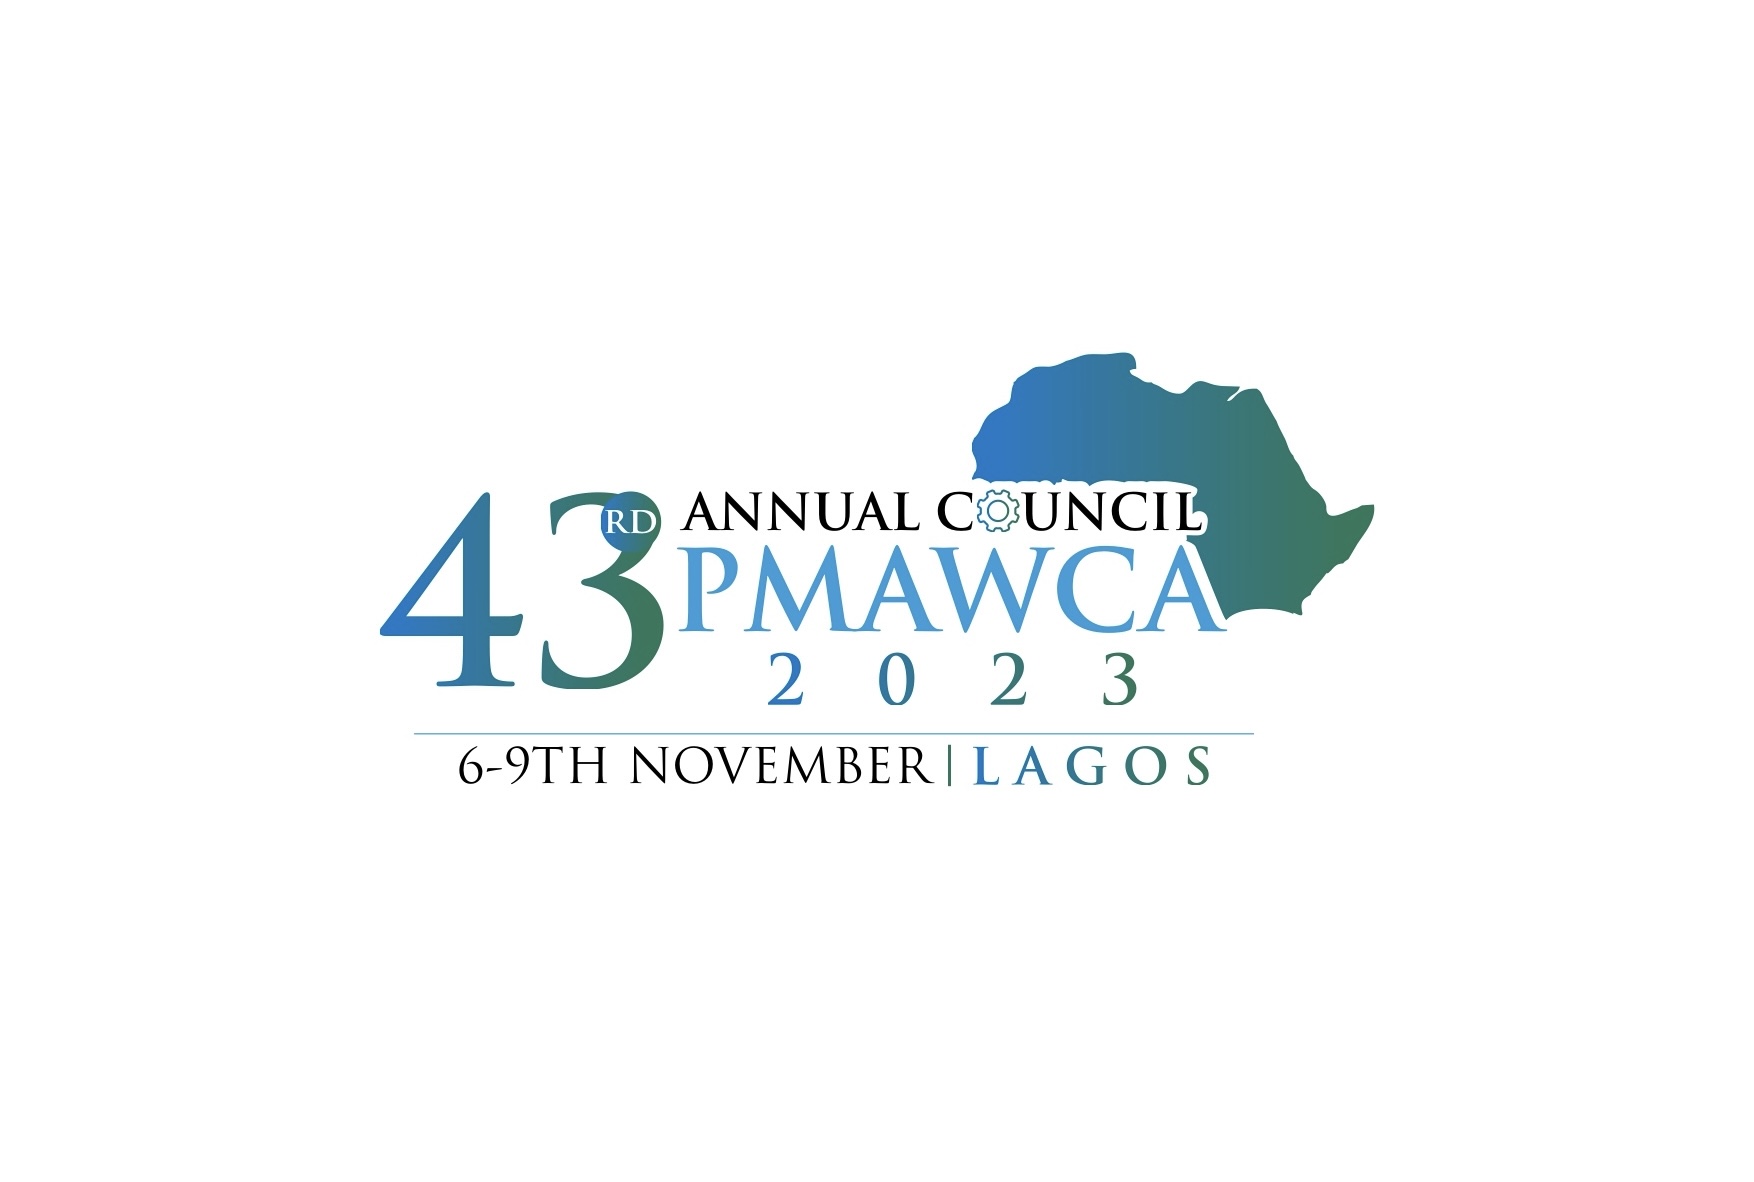 PMAWCA’s 43ʳᵈ Council and 18ᵗʰ Managing Director’s Round Table / Exhibition